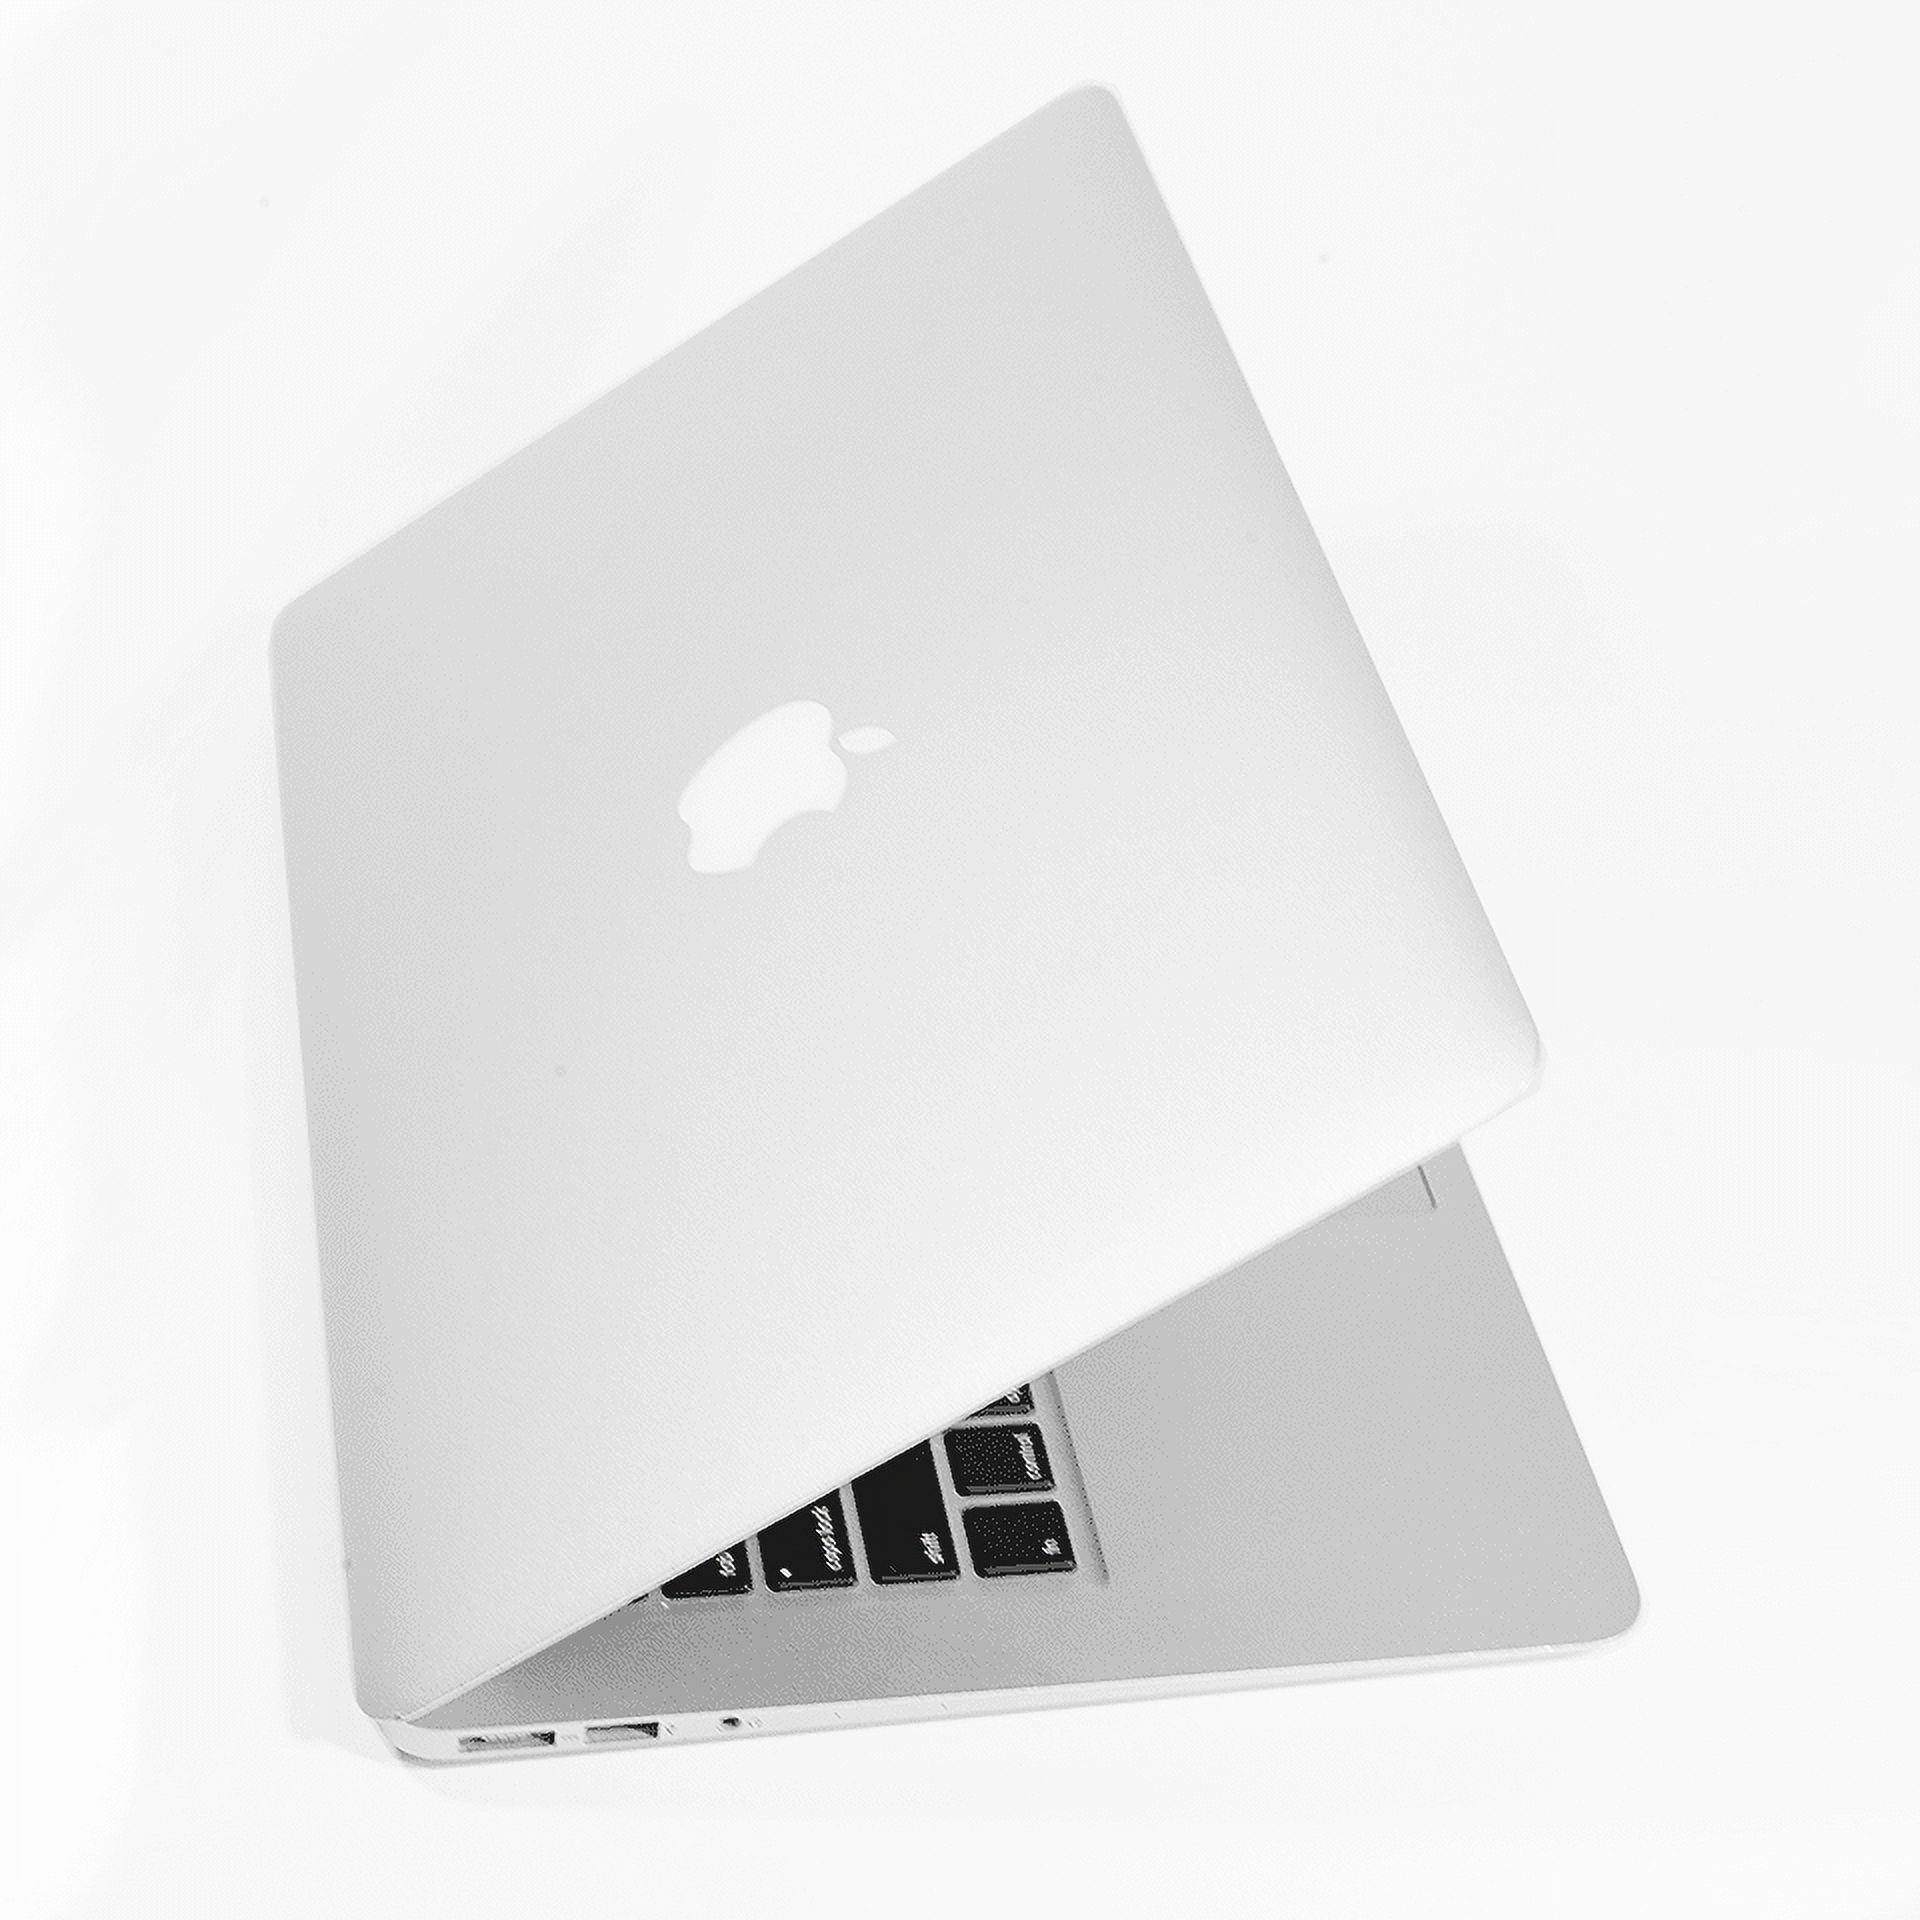 Restored 13" Apple MacBook Air 1.7GHz Dual Core i7 8GB Memory / 128GB SSD Turbo Boost to 3.3GHz (Refurbished) - image 2 of 4